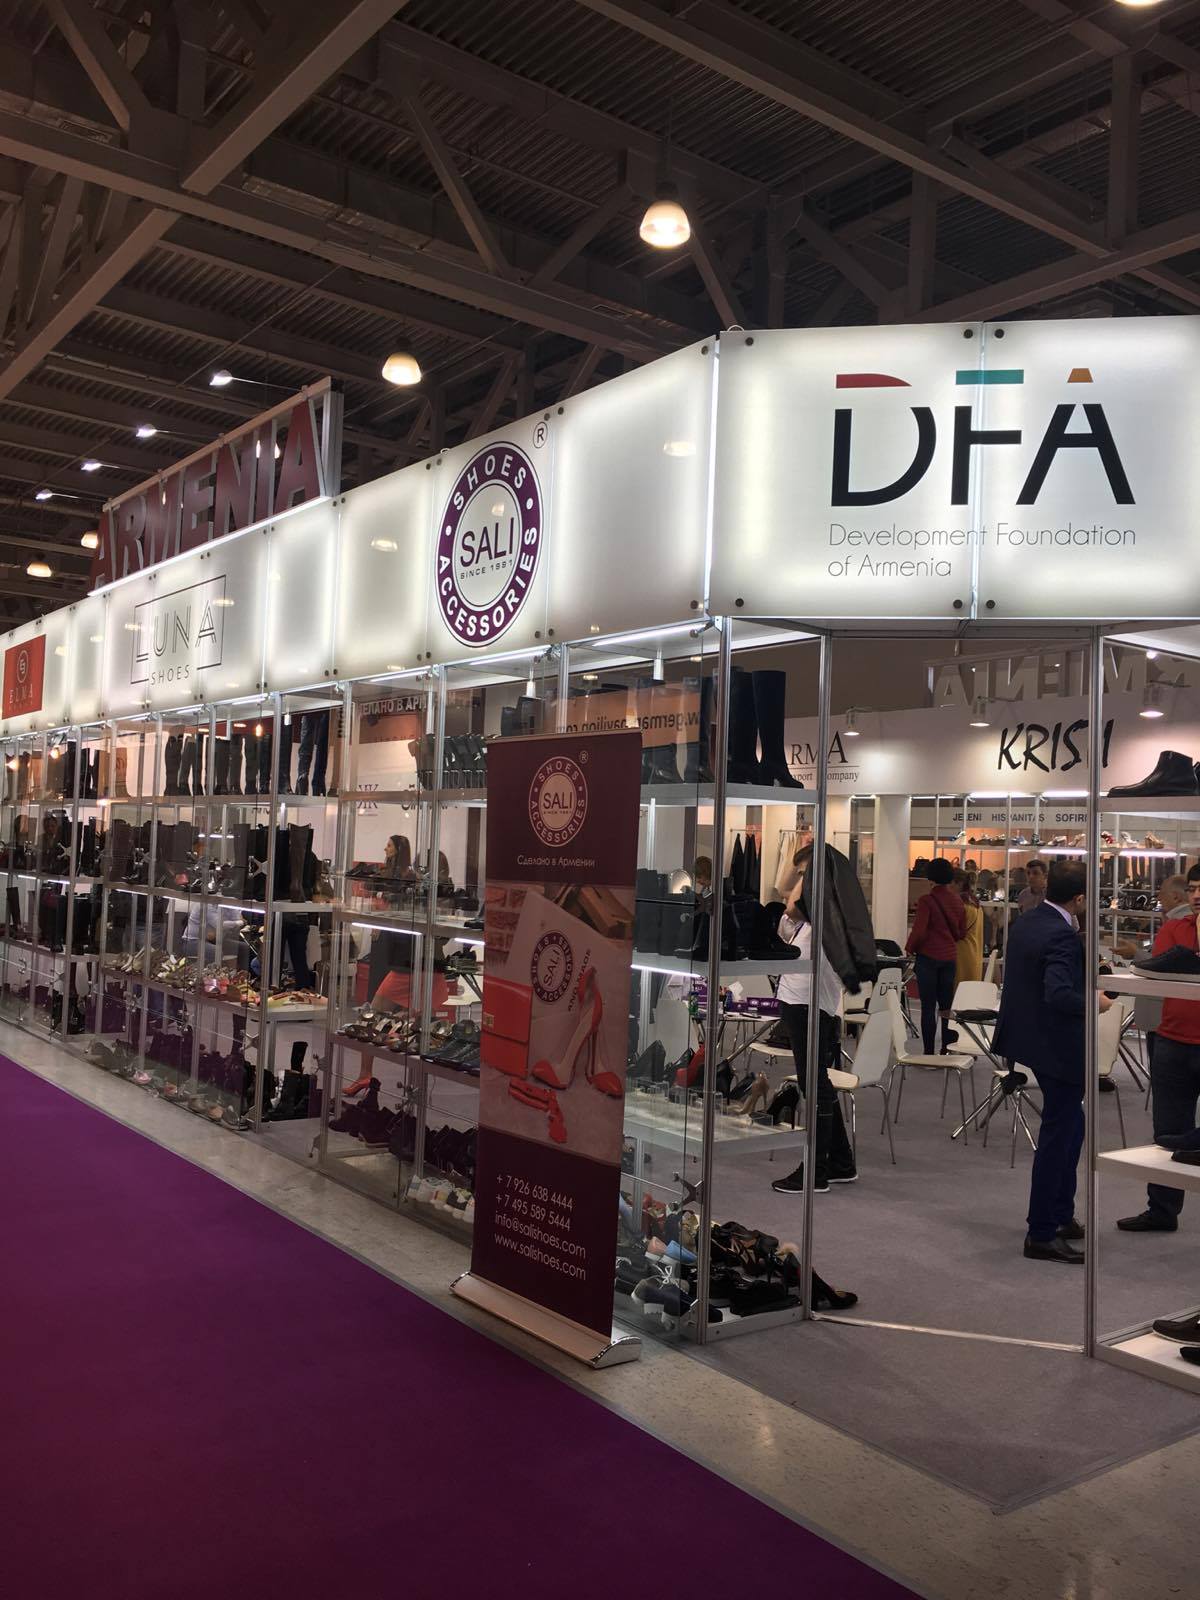 The shoes of Armenian production have established a presence in Russian market: export orders worth 300 million AMD as a result of one exhibition